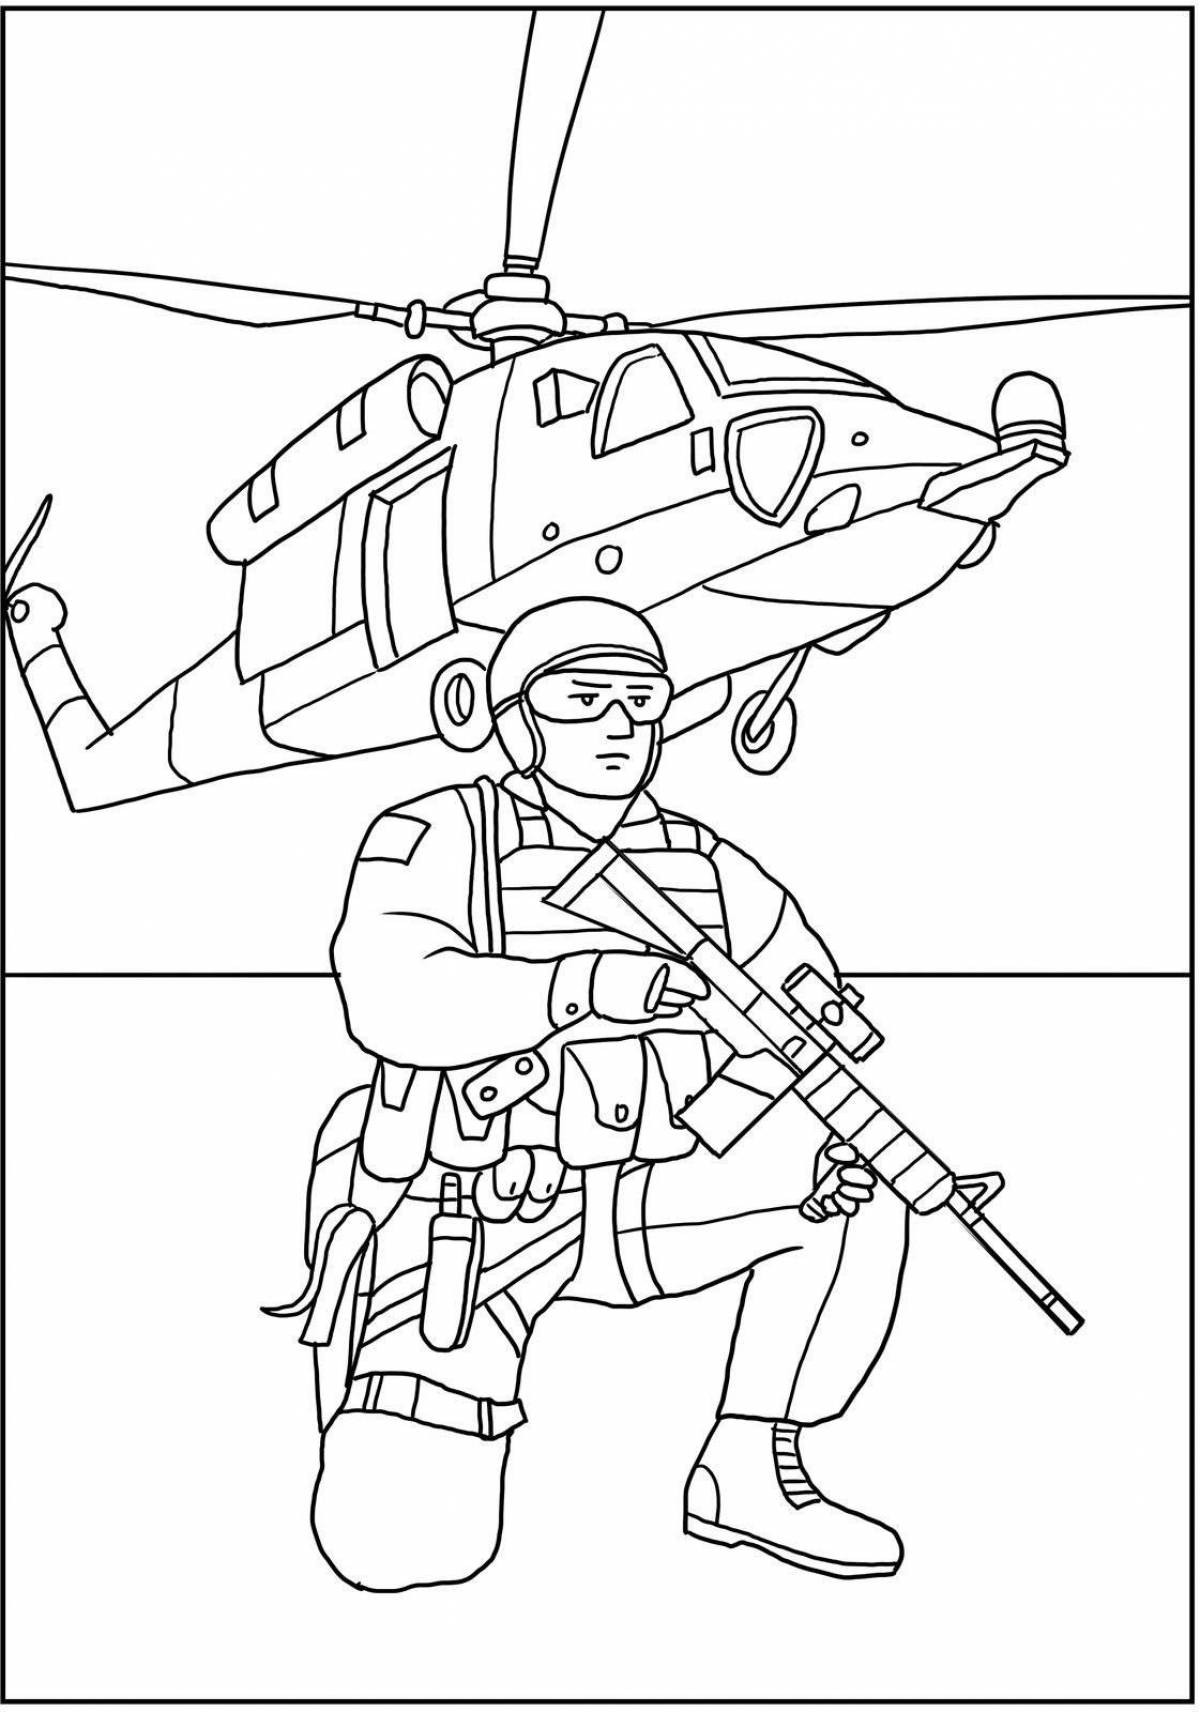 Resolute Soldier coloring page